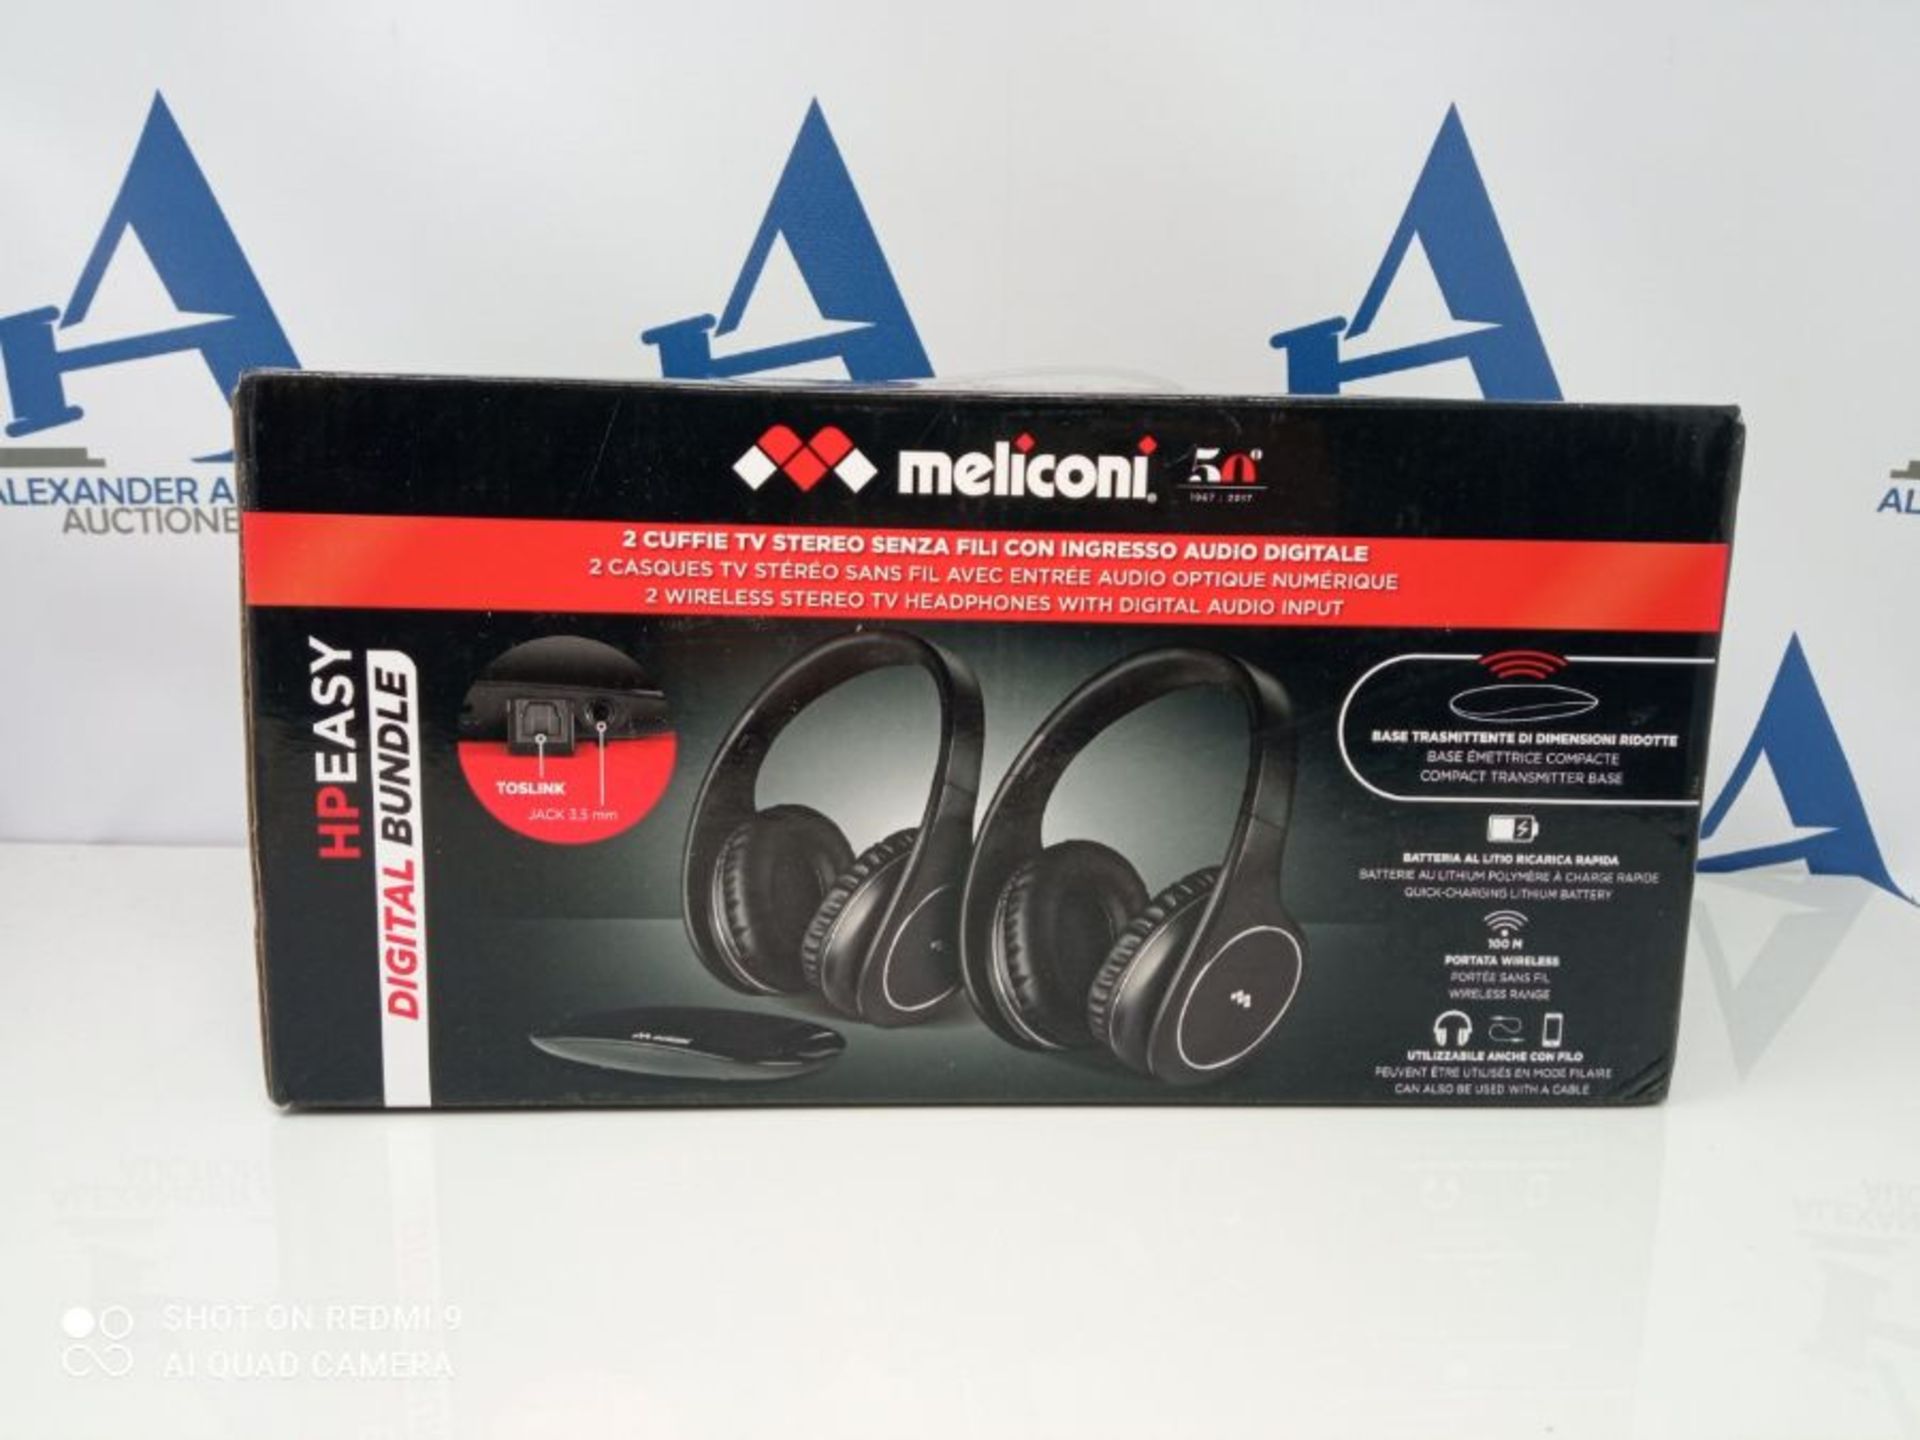 RRP £90.00 Meliconi HP Easy Digital Bundle, 2 Wireless Stereo TV Headsets, 100% Digital, with Ana - Image 2 of 3